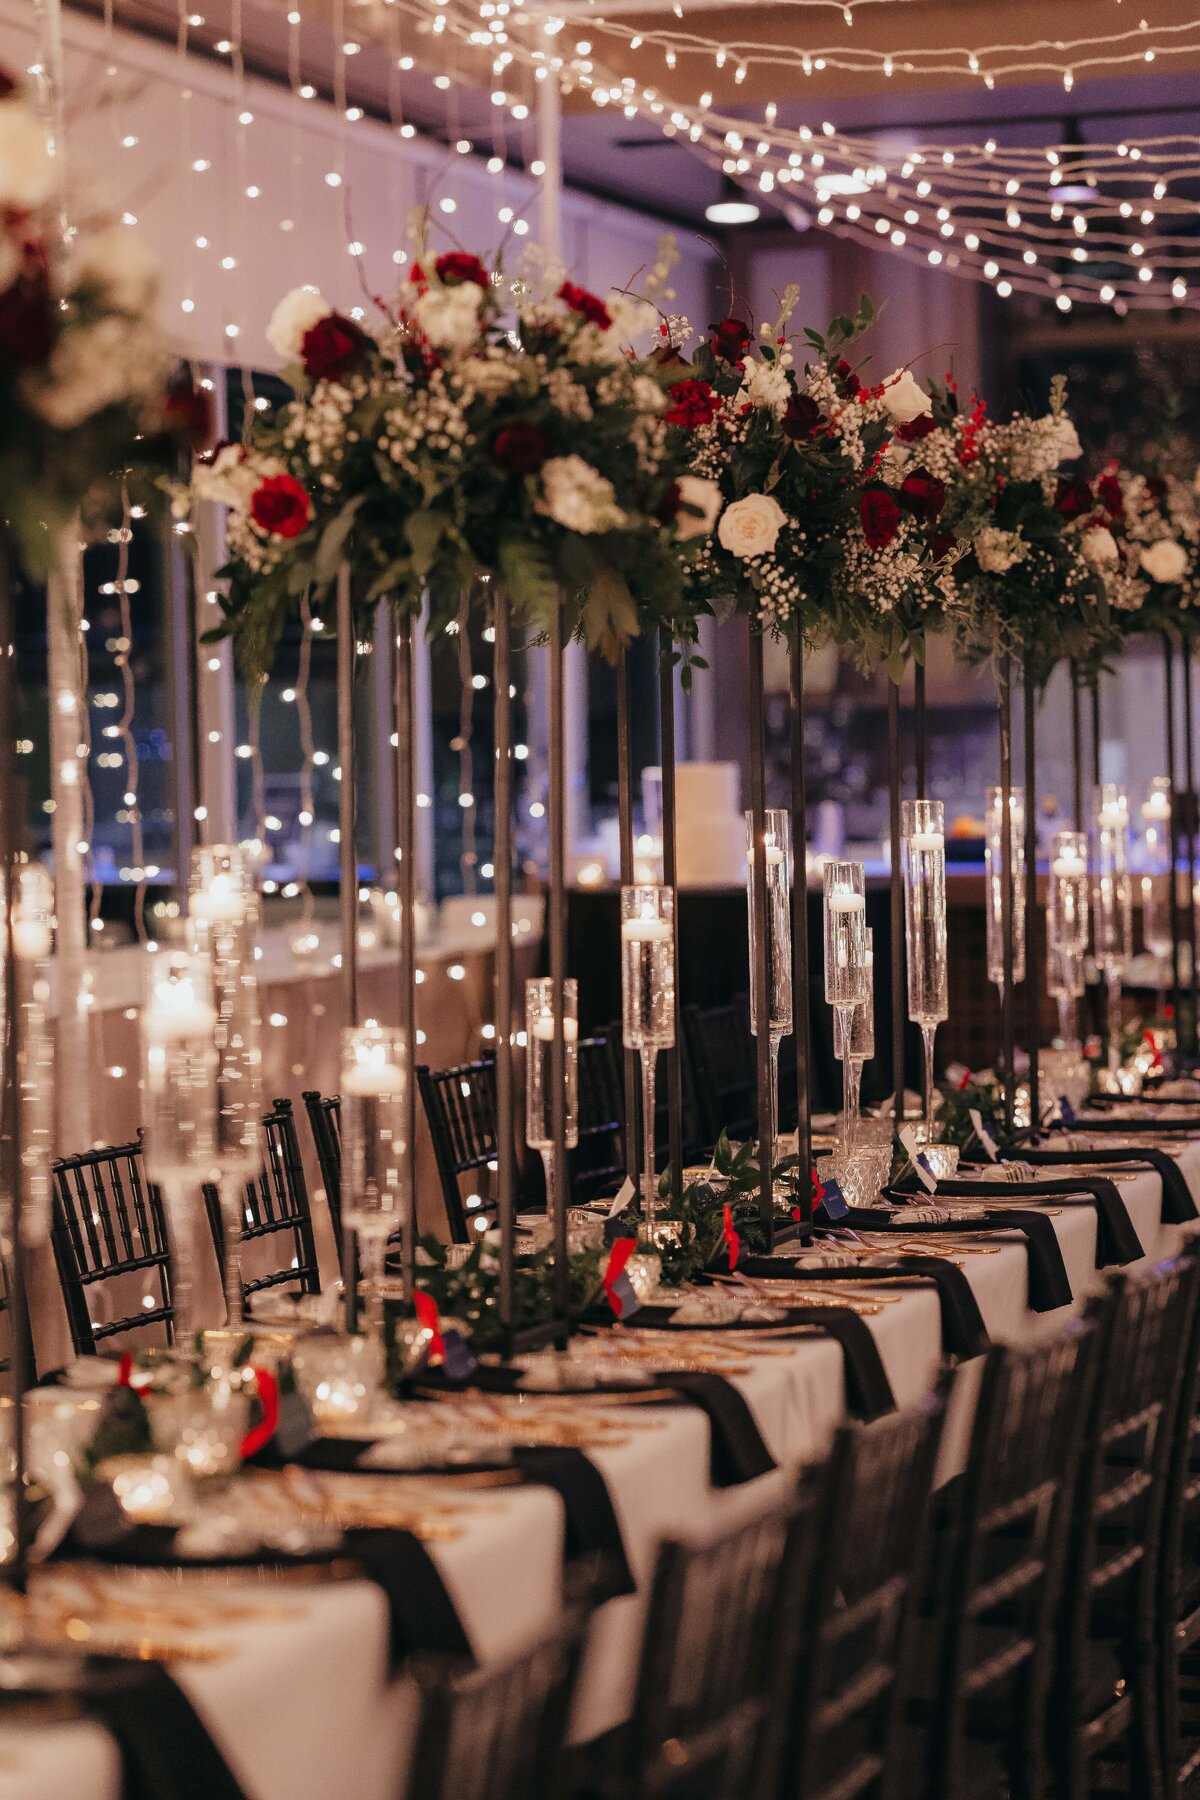 Elegant Iowa weddings reception table with floral centerpieces and candles under string lights, creating a romantic ambiance.